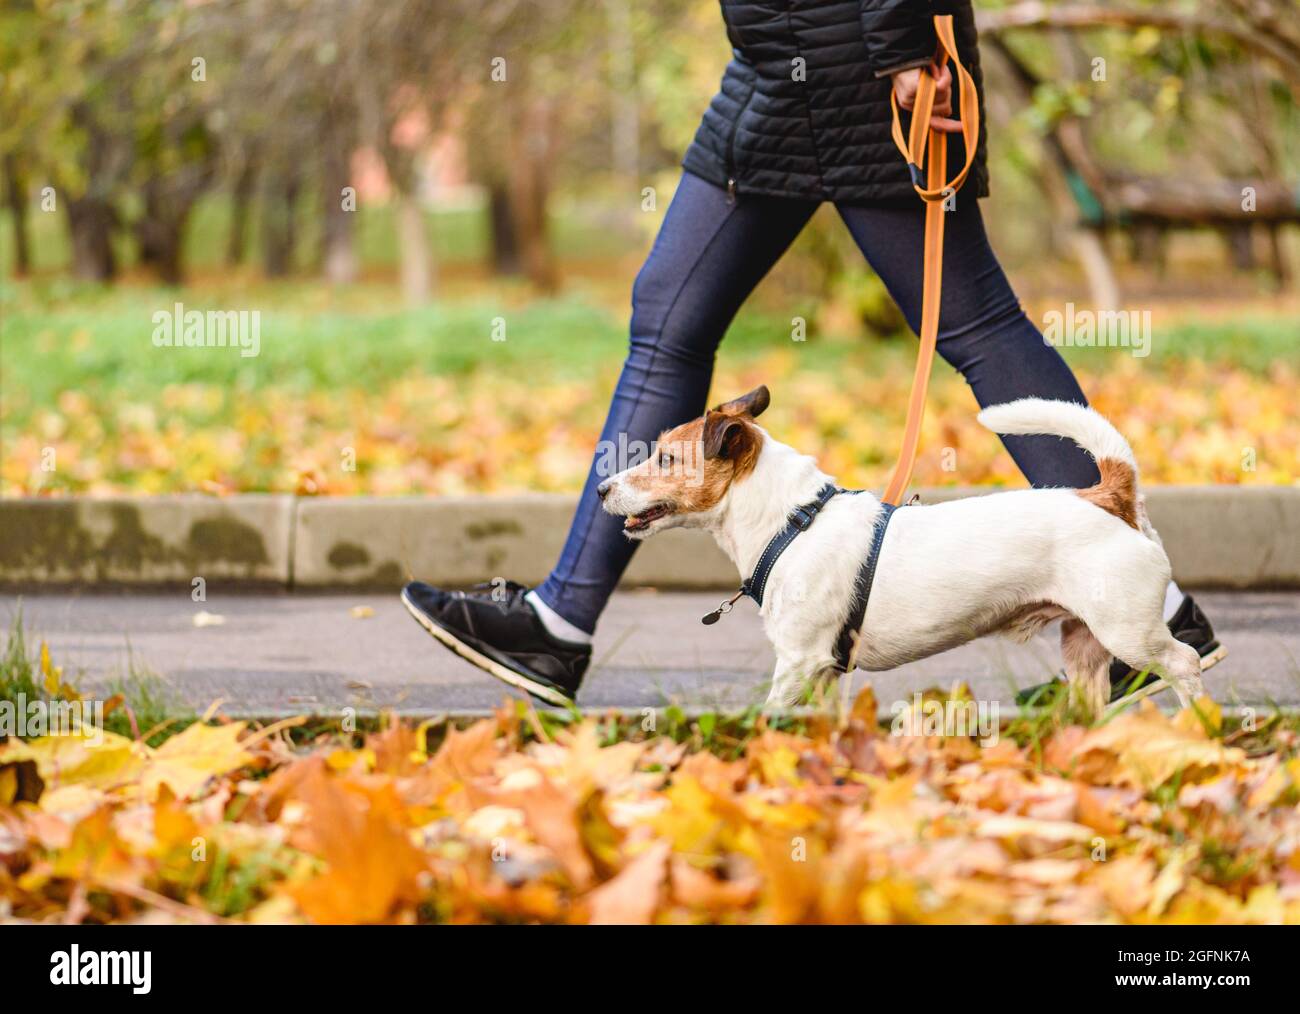 Well trained dog walking on loose leash next to owner in autumn park on warm sunny day Stock Photo